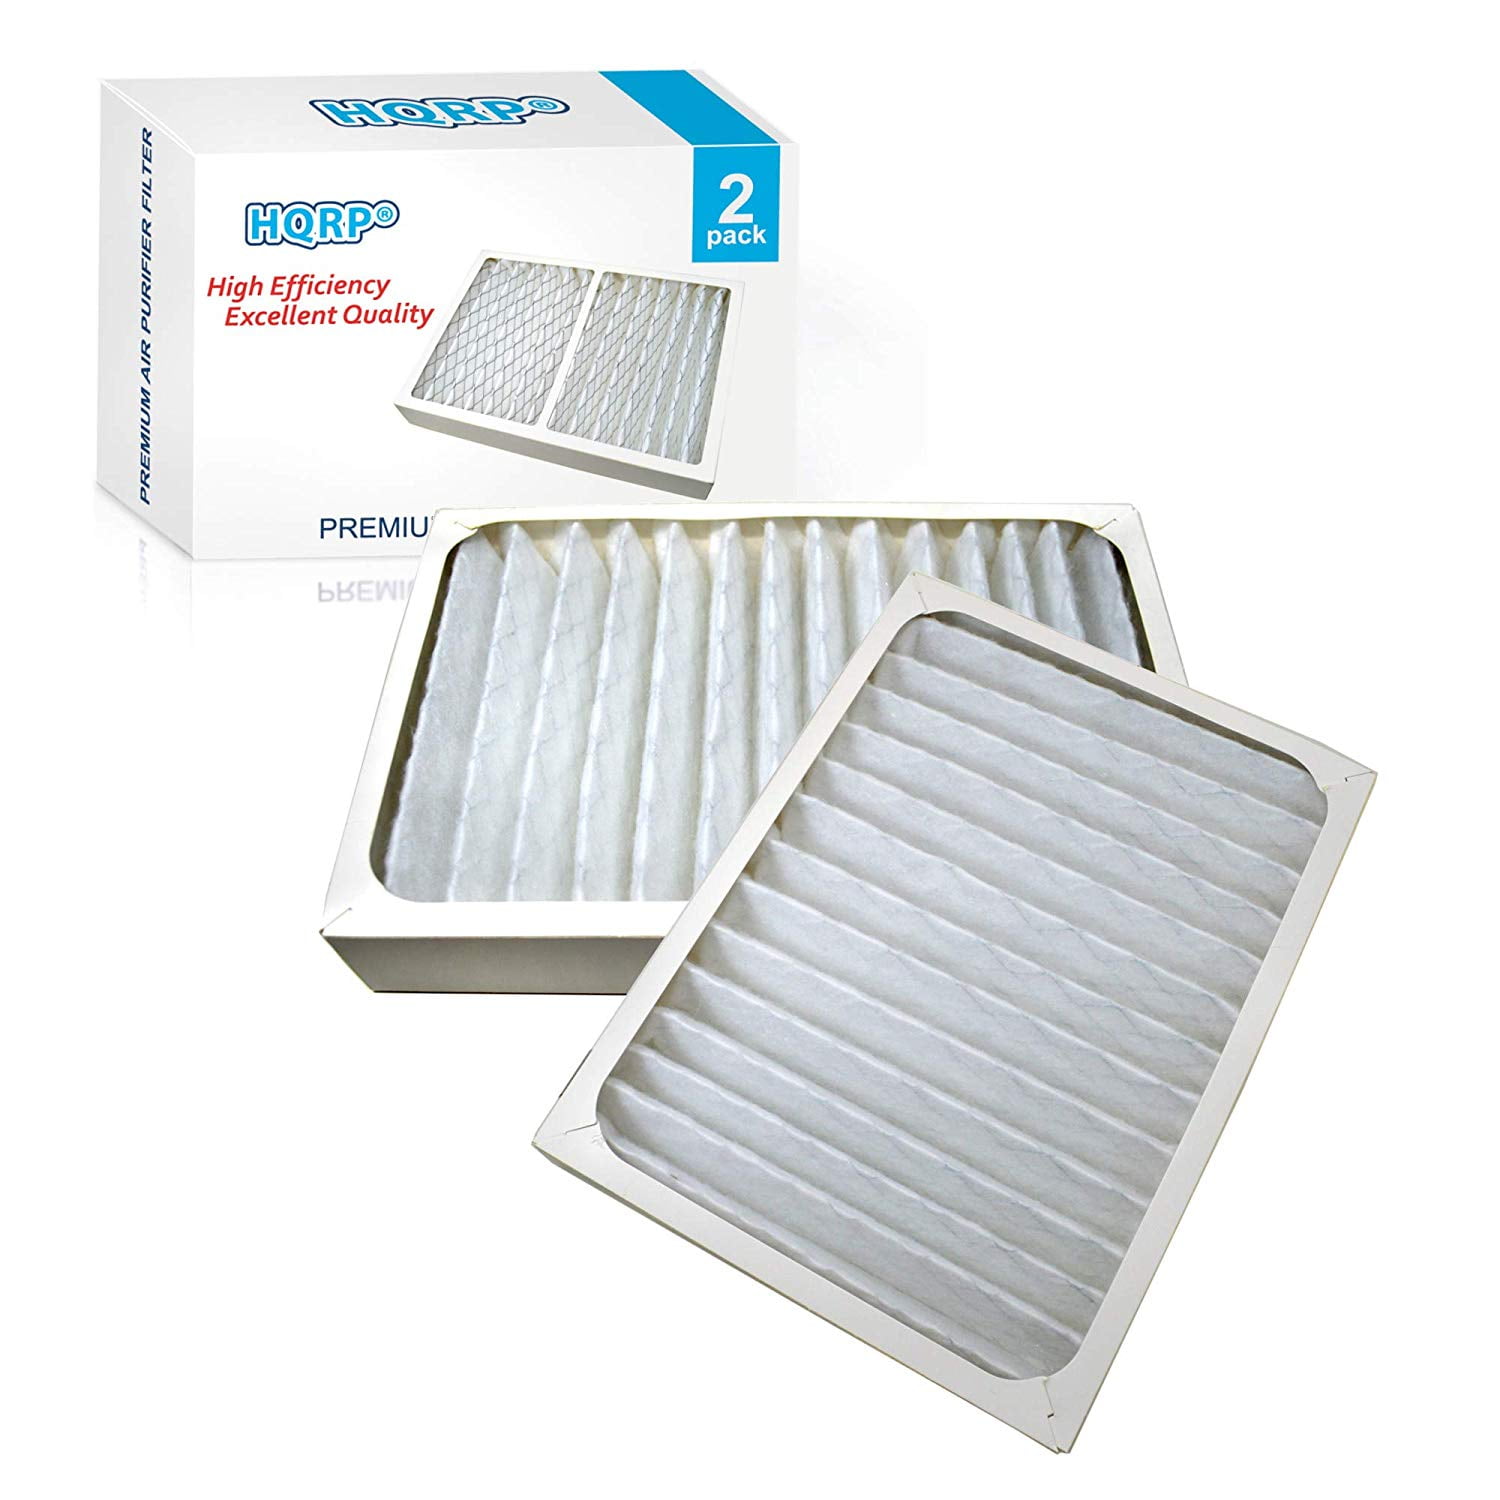 2x HQRP Air Cleaner Filters for Hunter HEPAtech 30057 30059 30067 30078 30079 